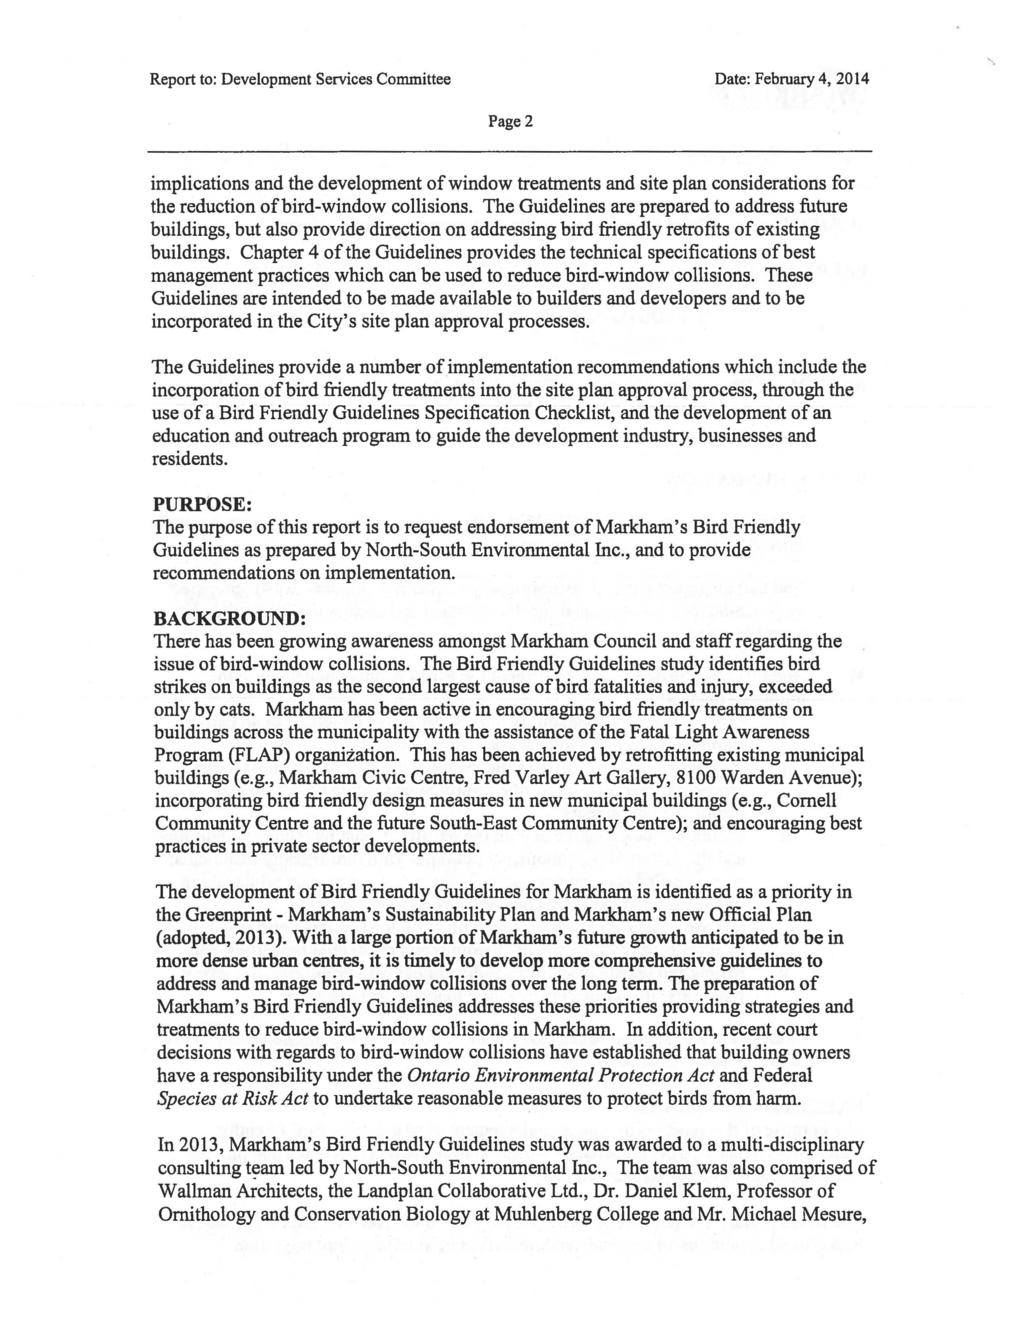 Report to: Development Services Committee Date: February 4, 2014 Page2 implications and the development of window treatments and site plan considerations for the reduction ofbird-window collisions.